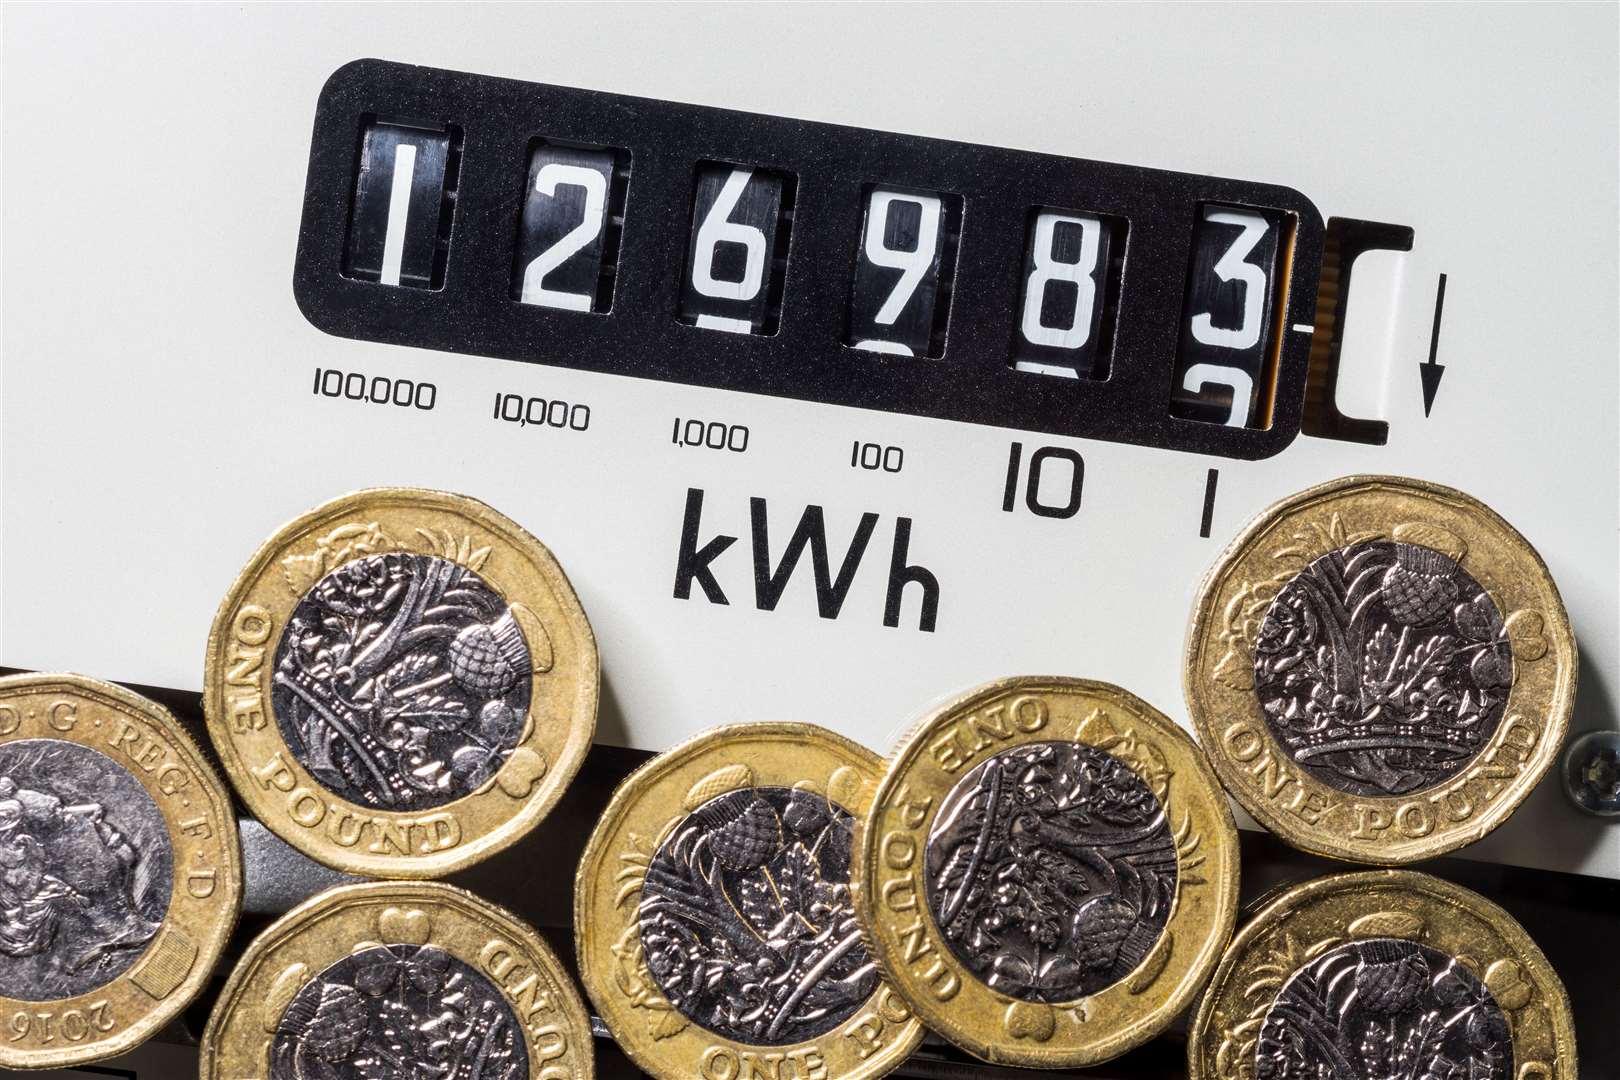 A few simple measures could save you pounds on your energy bills this winter.